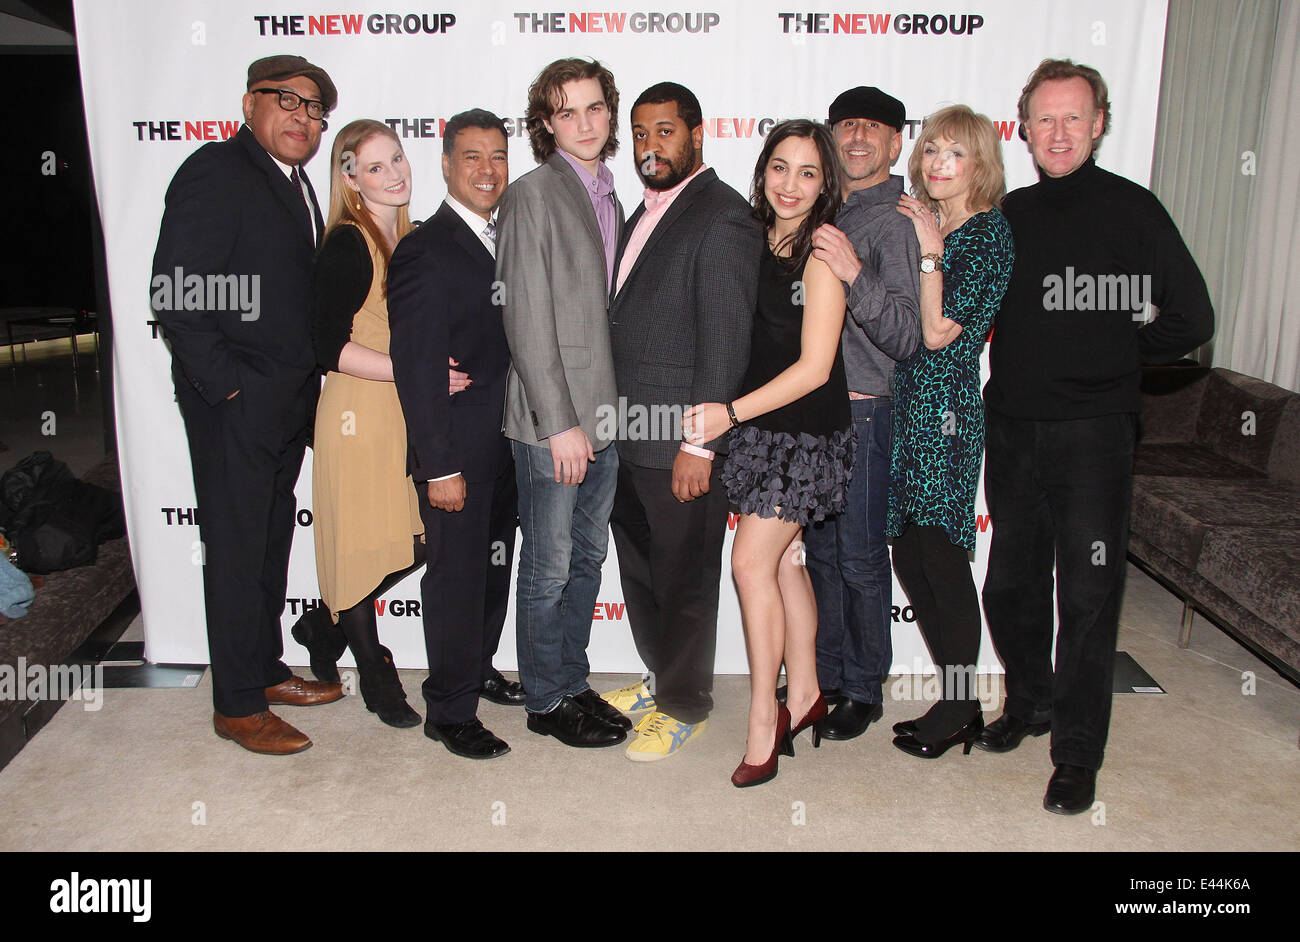 Opening night after party for the New Group production of Intimacy held at the Out Hotel - Arrivals.  Featuring: Keith Randolph Smith,Ella Dershowitz,David Anzuelo,Austin Cauldwell,Playwright Thomas Bradshaw,Dea Julien,Director Scott Elliott,Laura Esterma Stock Photo